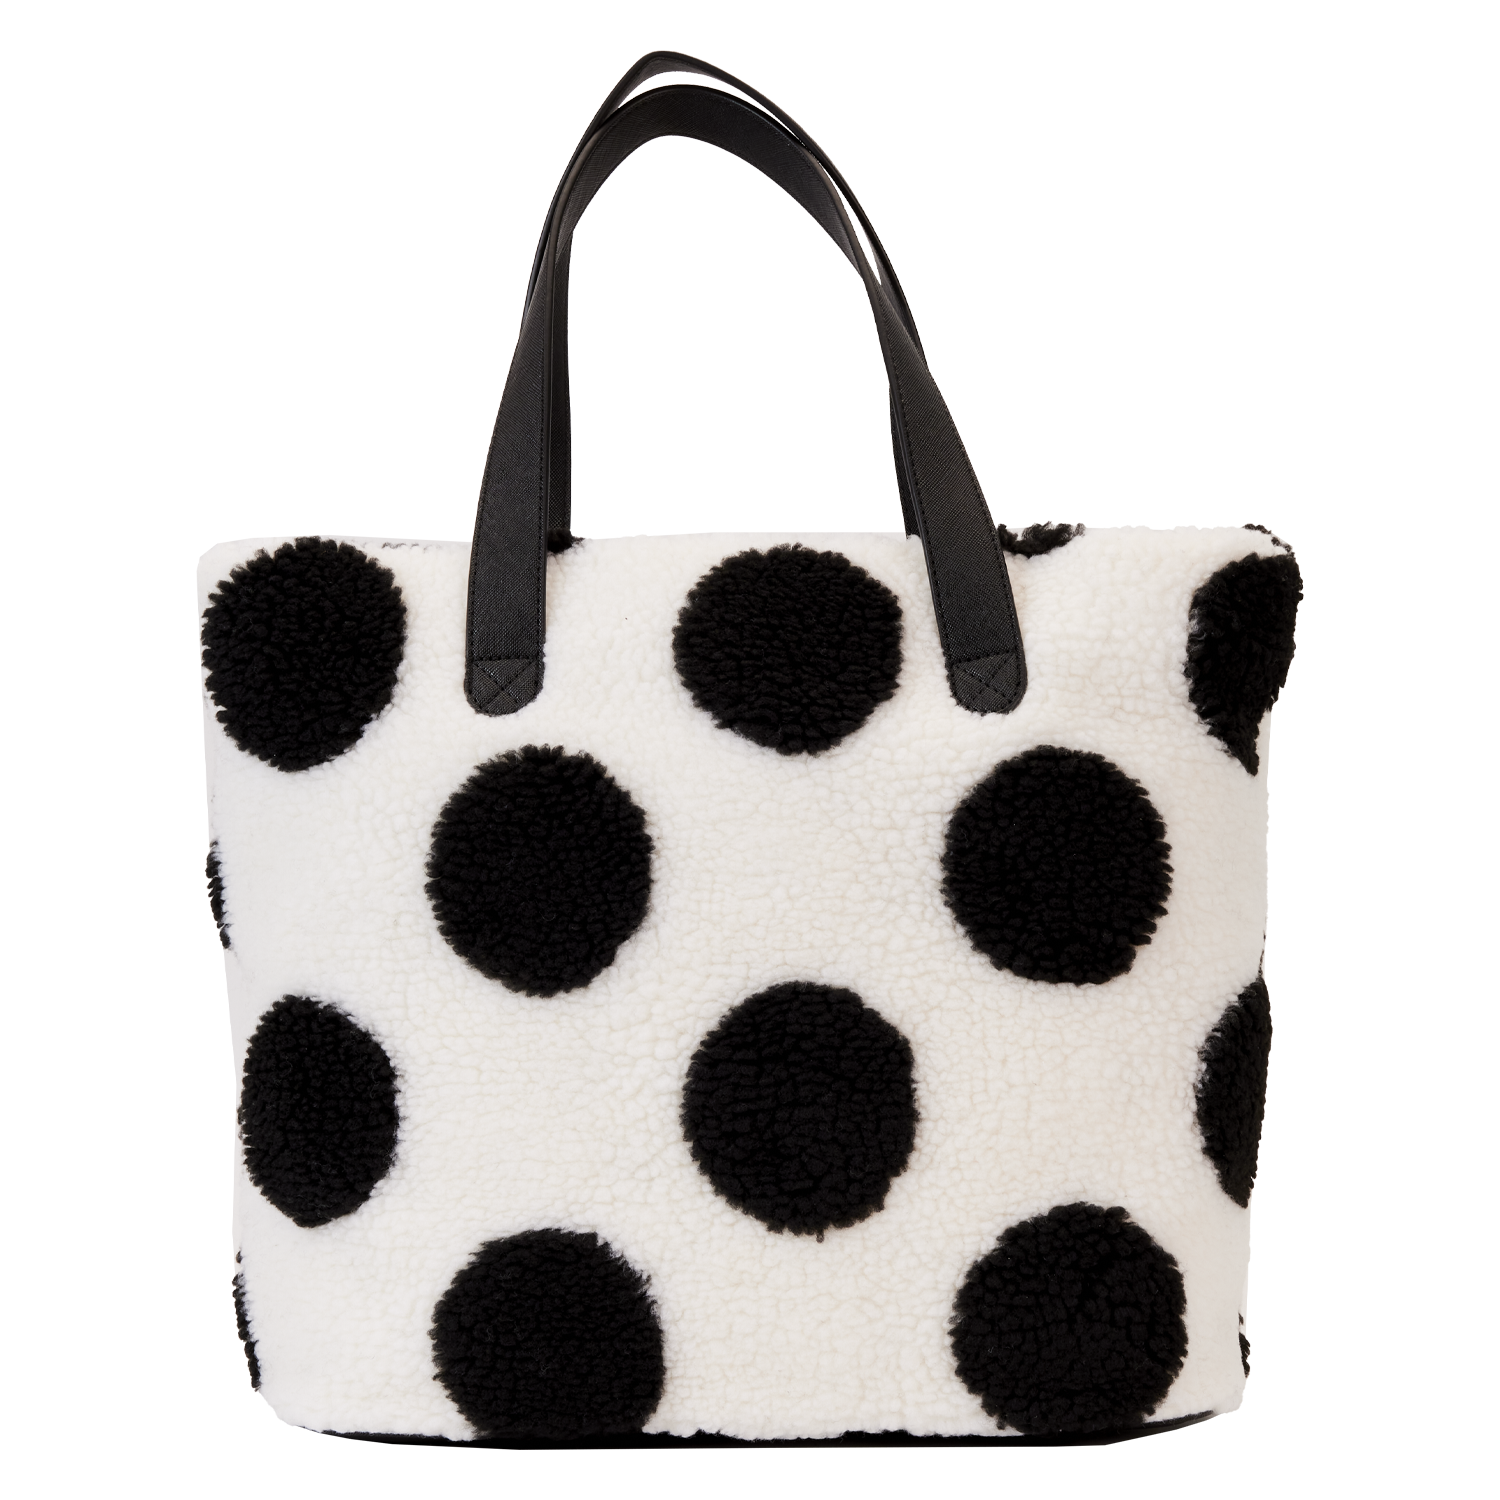 Buy Minnie Mouse Rocks the Dots Classic Sherpa Tote Bag at Loungefly.